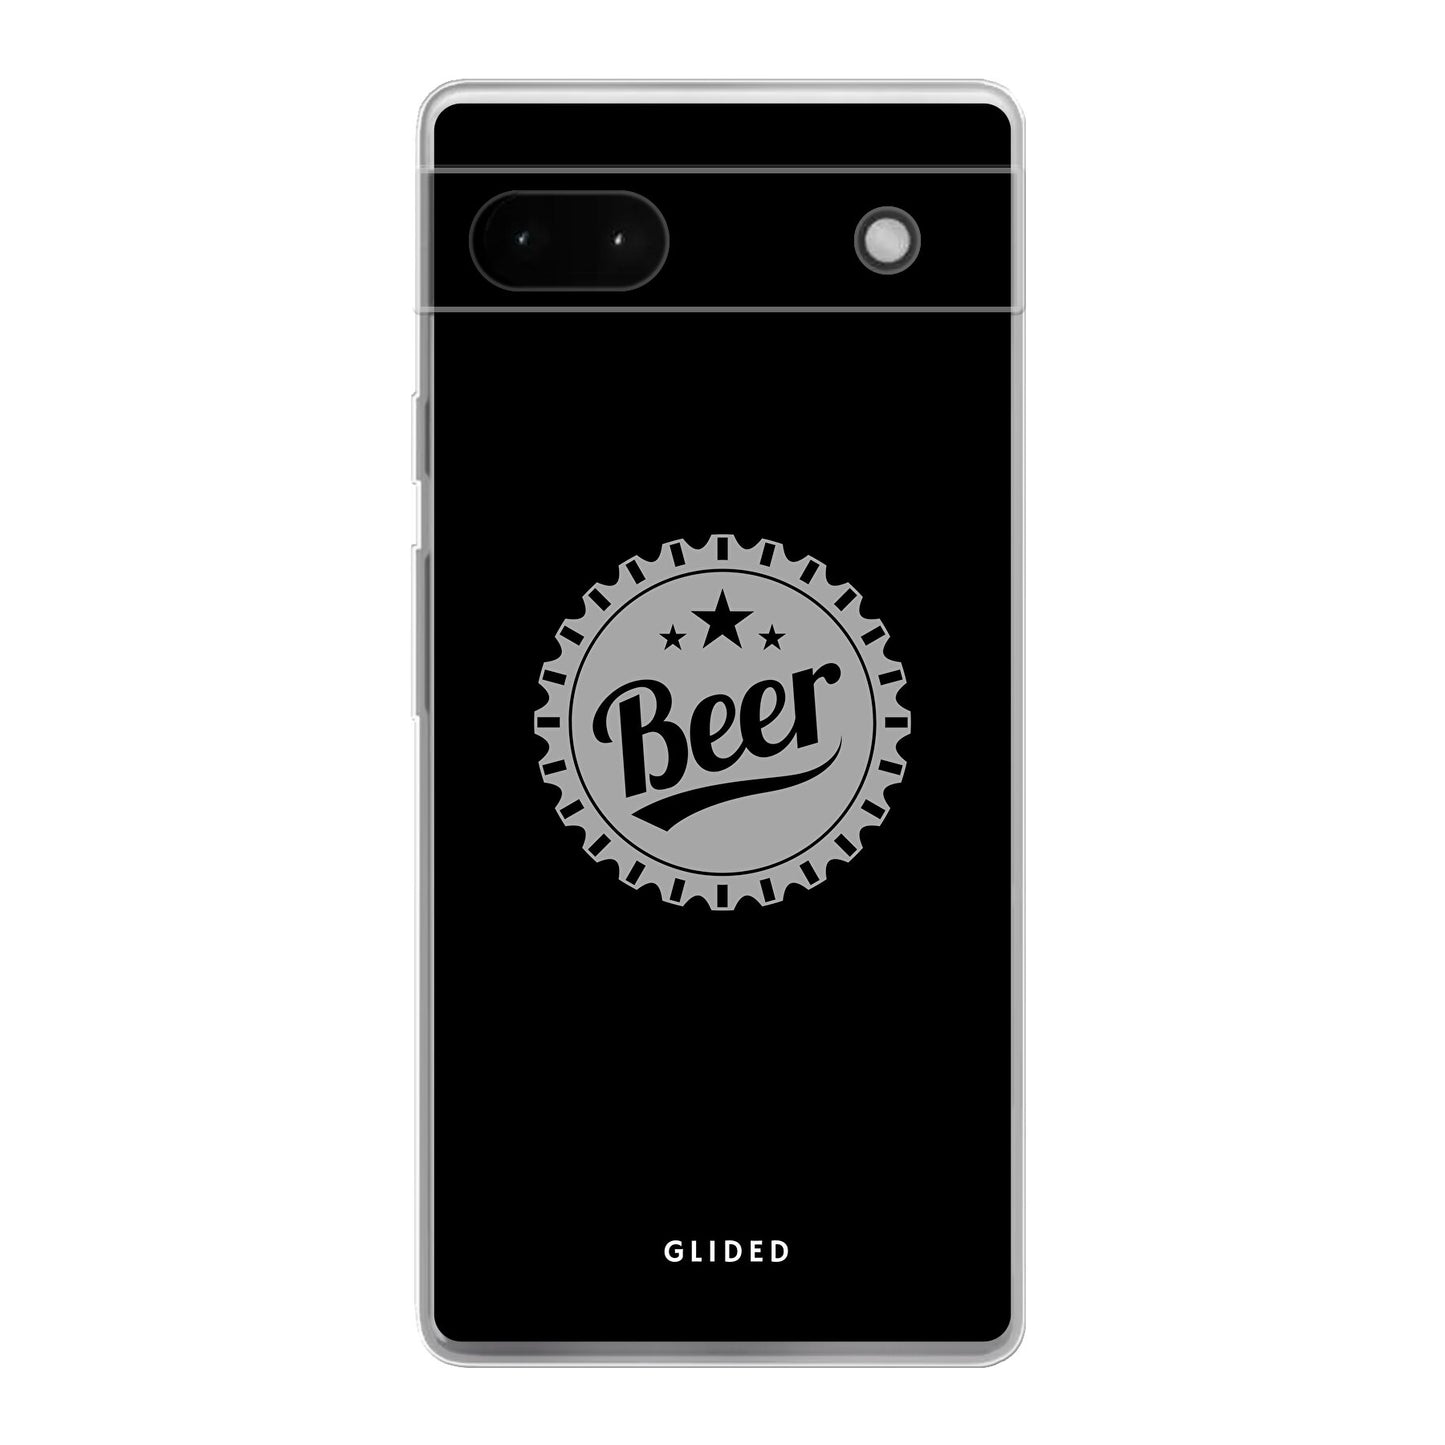 Cheers - Google Pixel 6a - Soft case